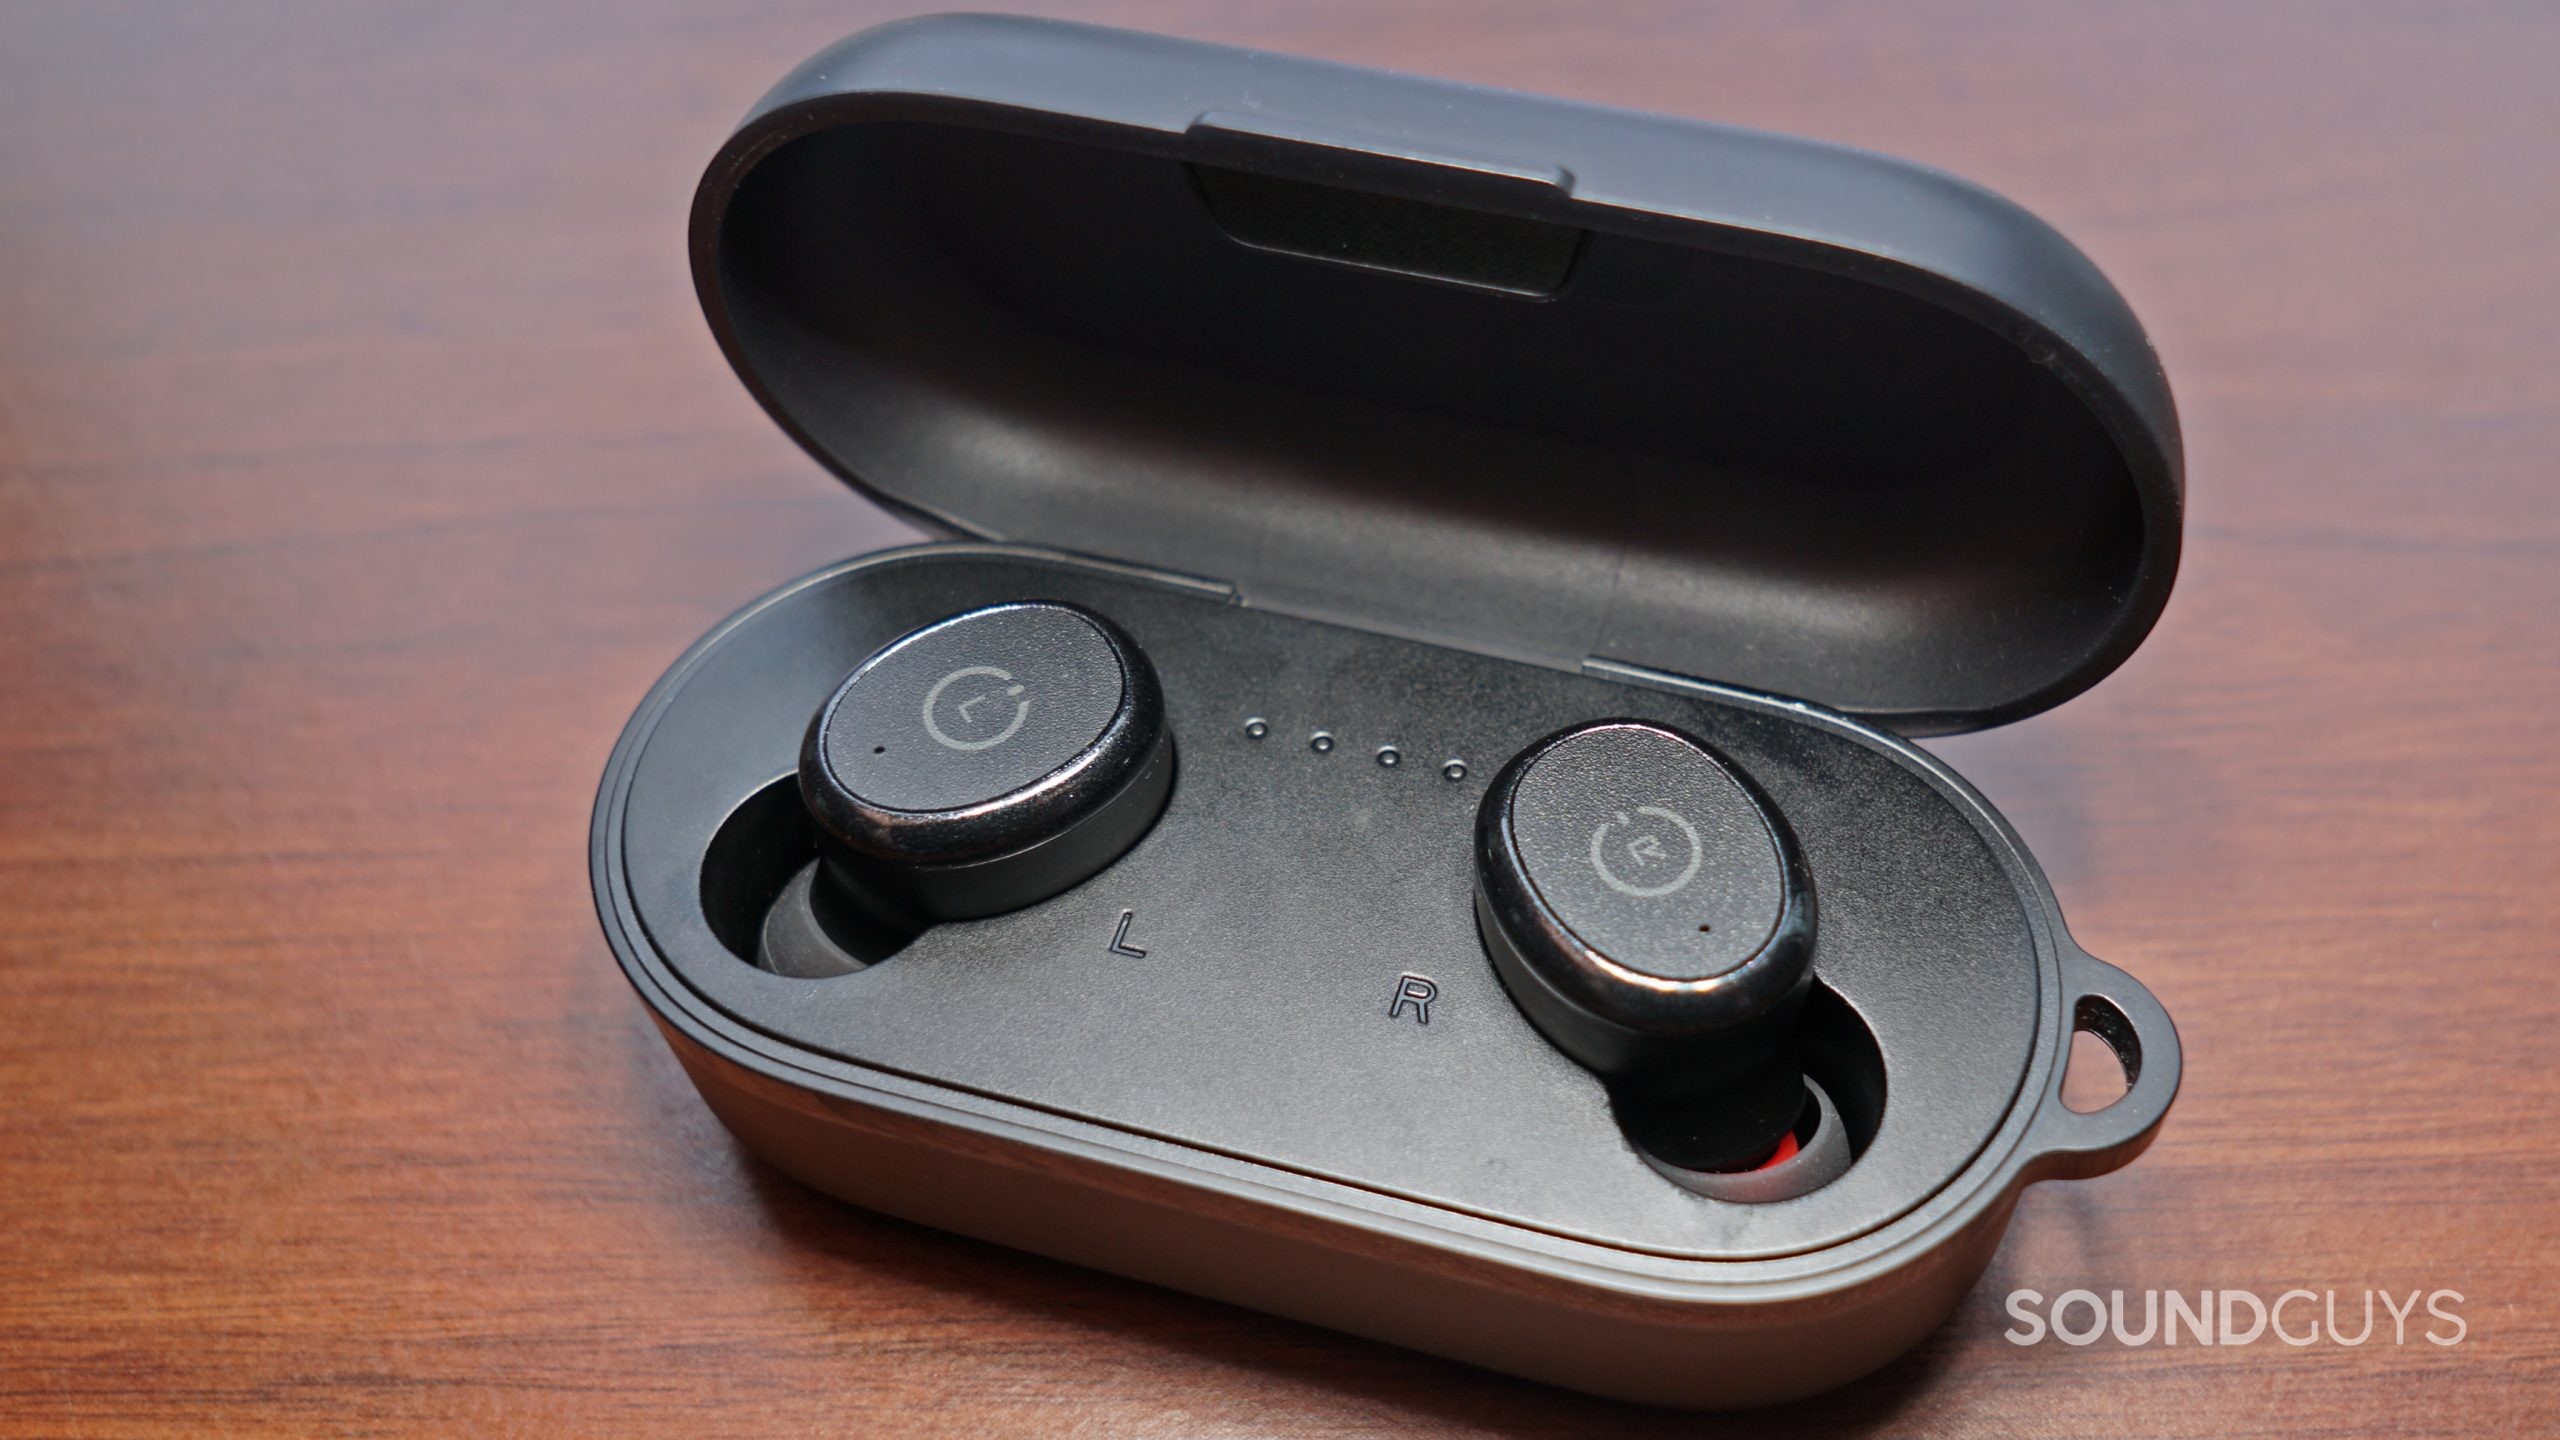 the difference between Tozo T6 vs T10 true wireless earbuds - smartphone  accessories review